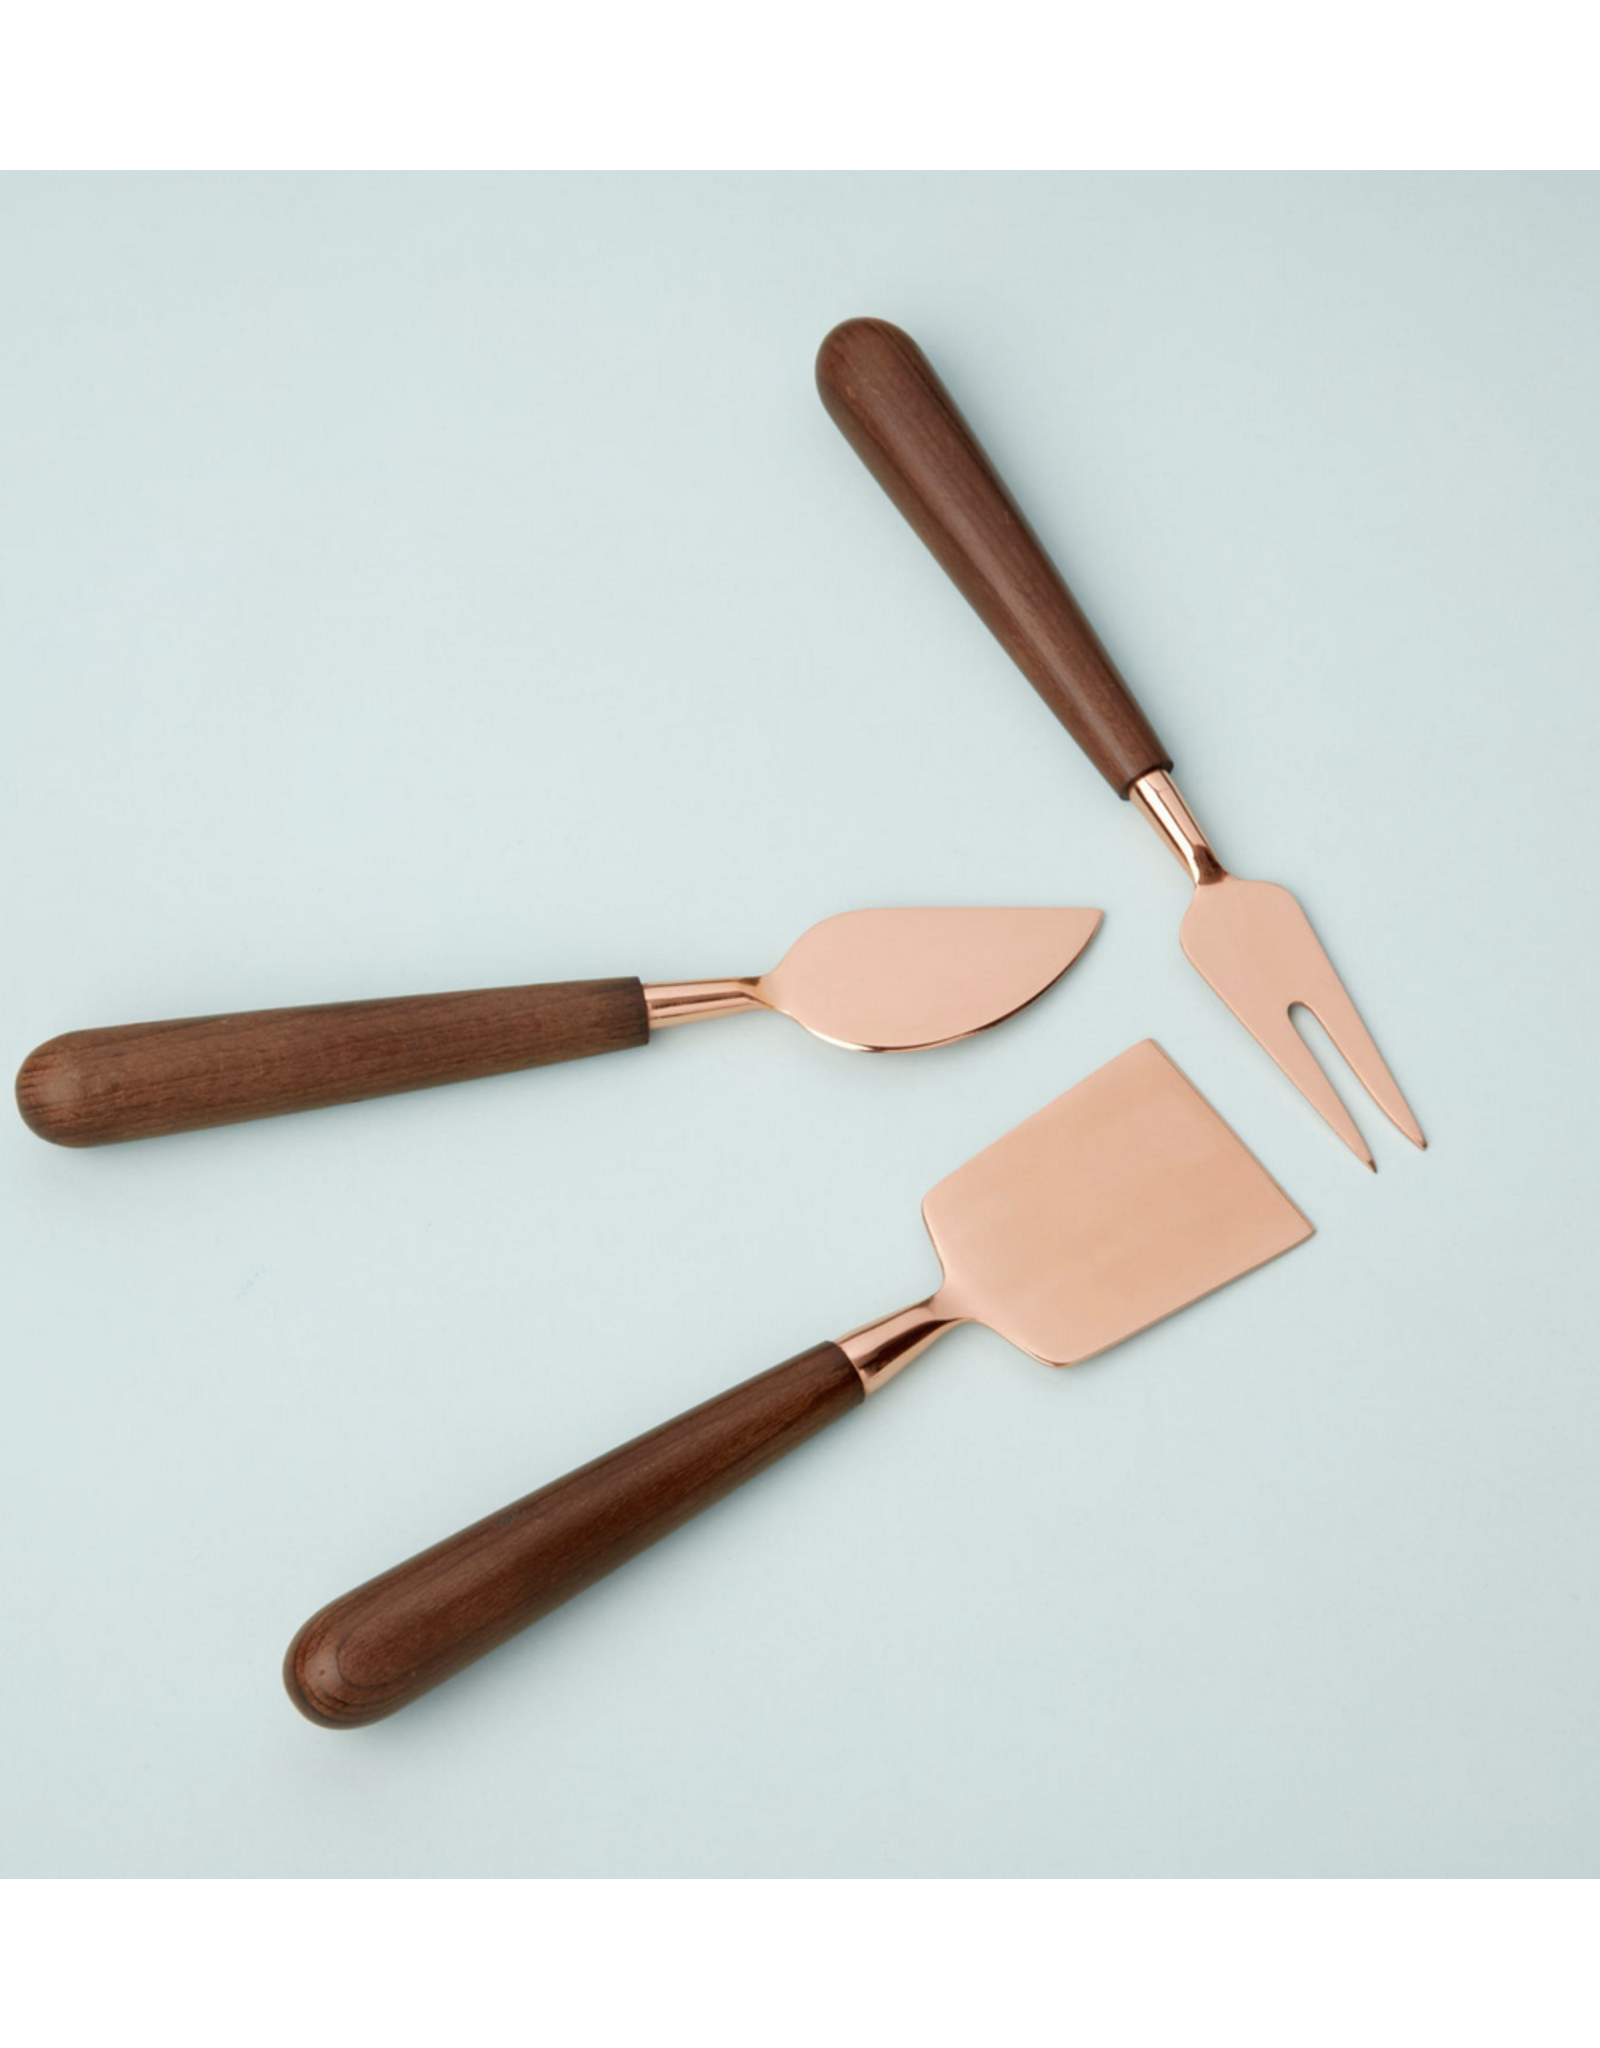 Be Home Copper & Wood Cheese Tools, set of 3